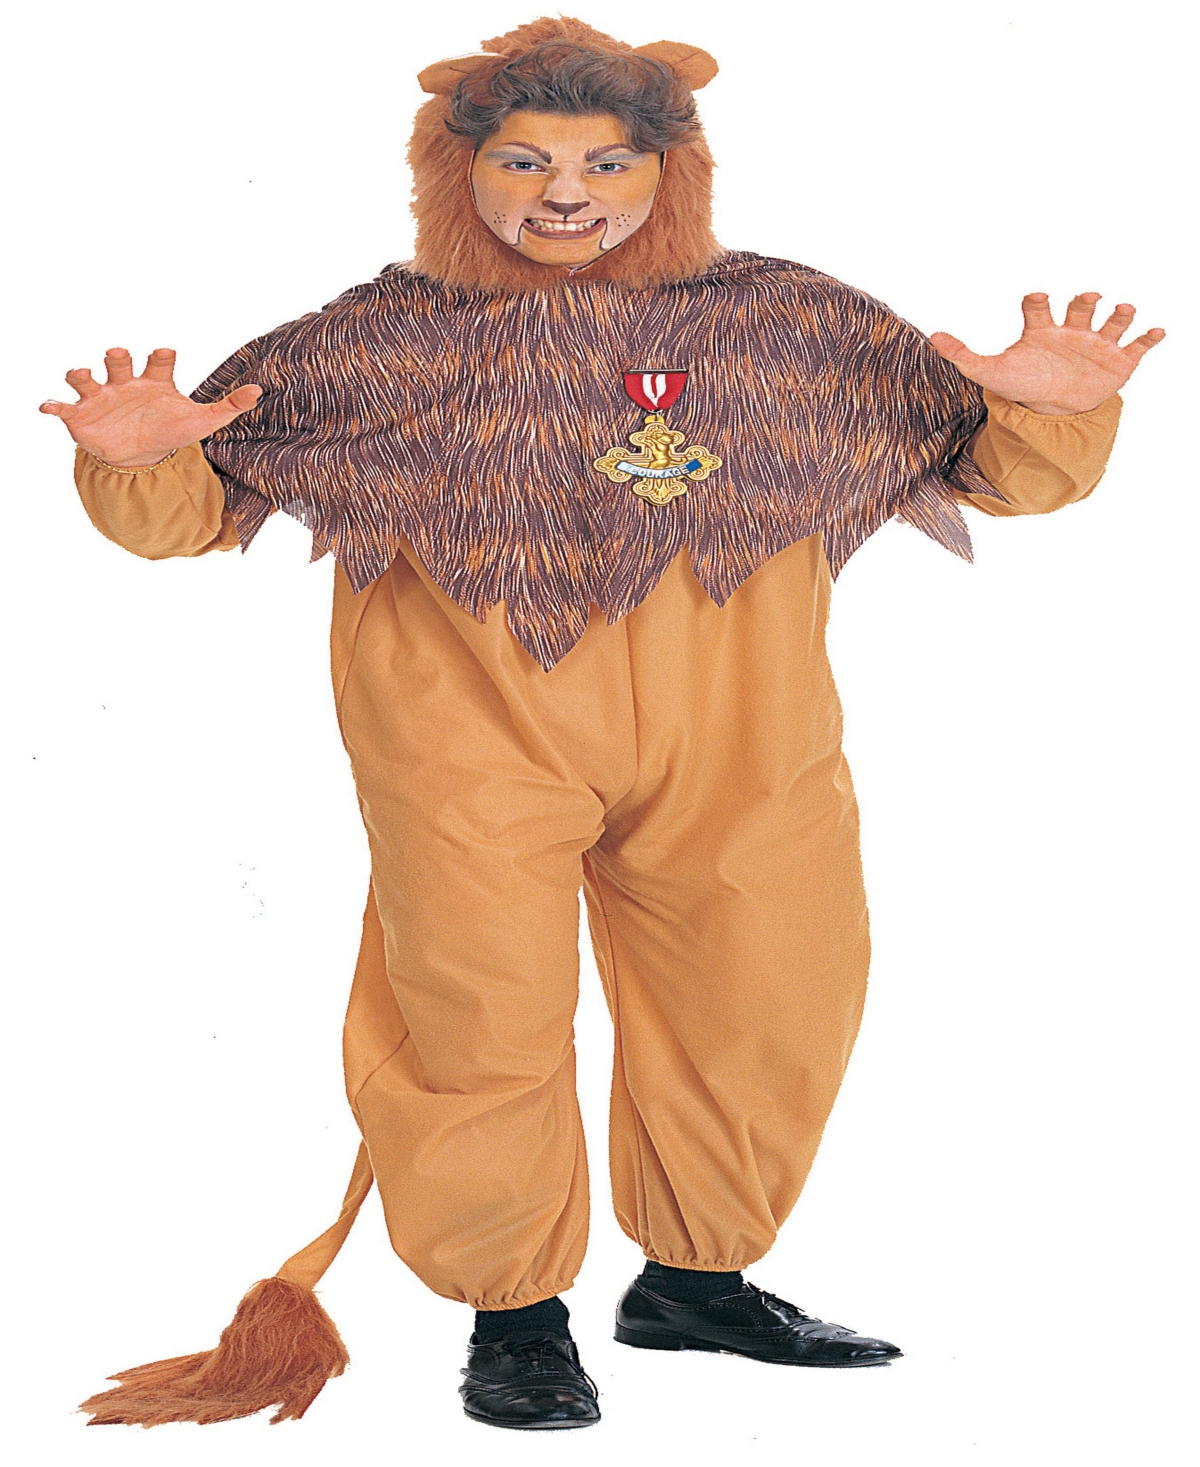 Buy Seasons Men's The Wizard of Oz Cowardly Lion Costume - Yellow